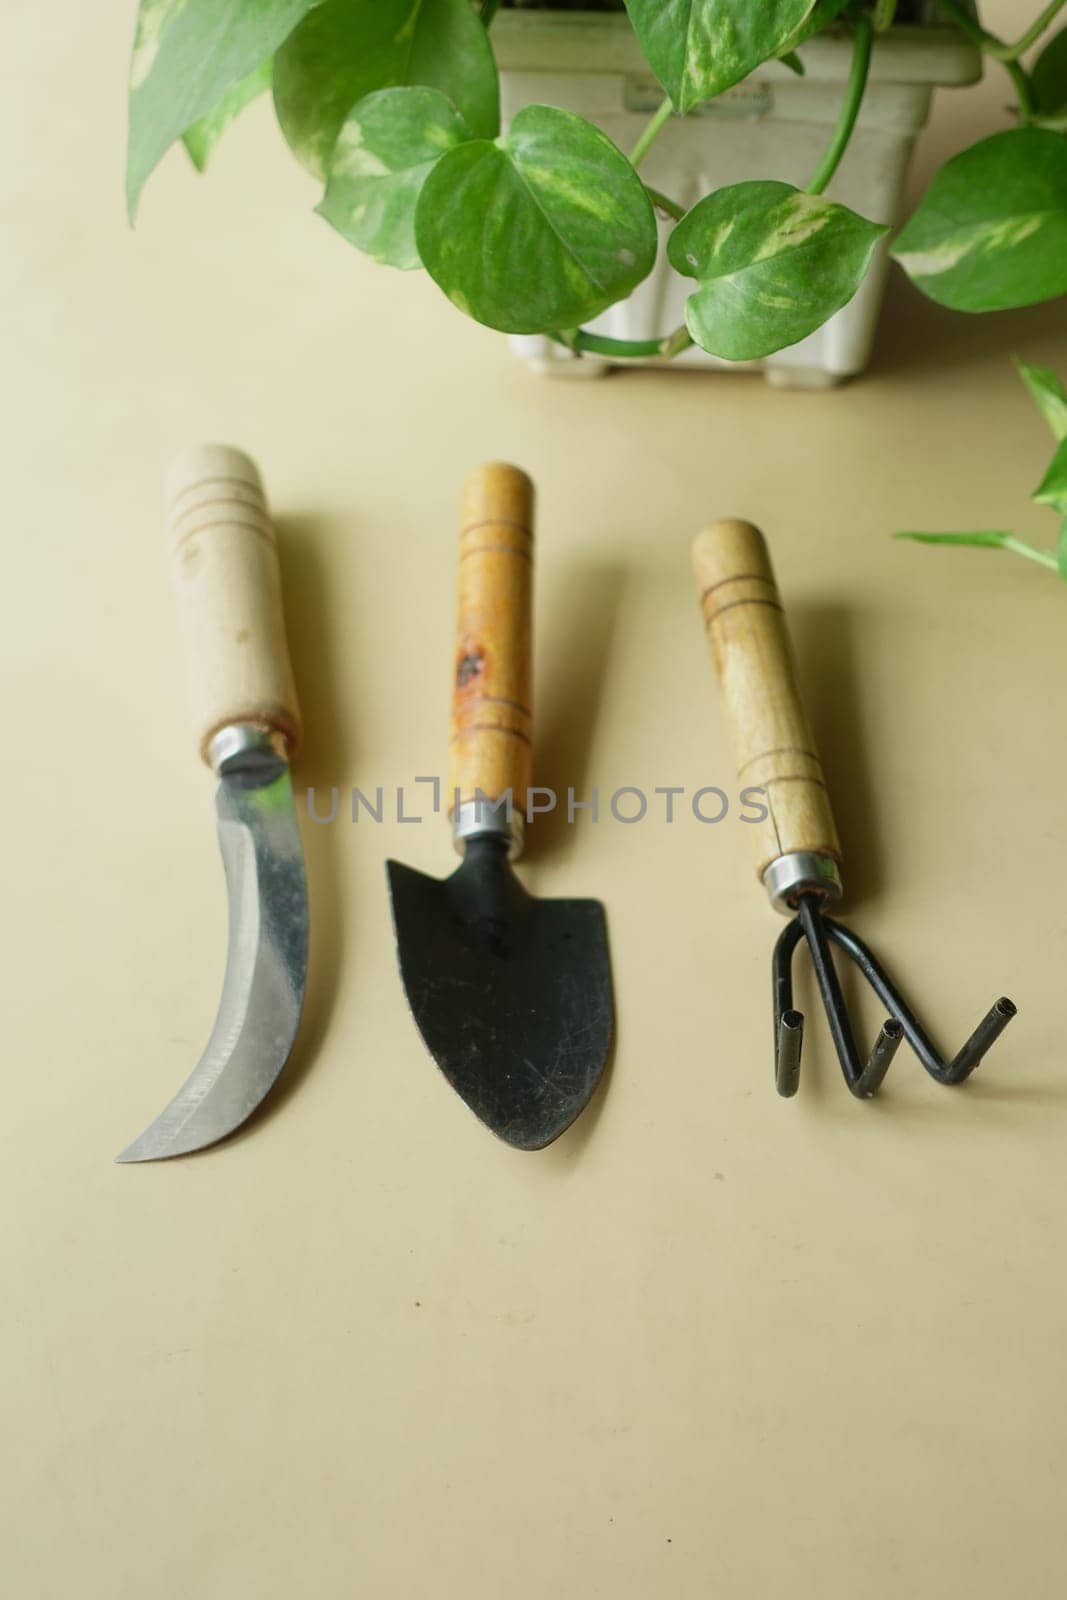 gardening tools and plant on a table with copy space by towfiq007